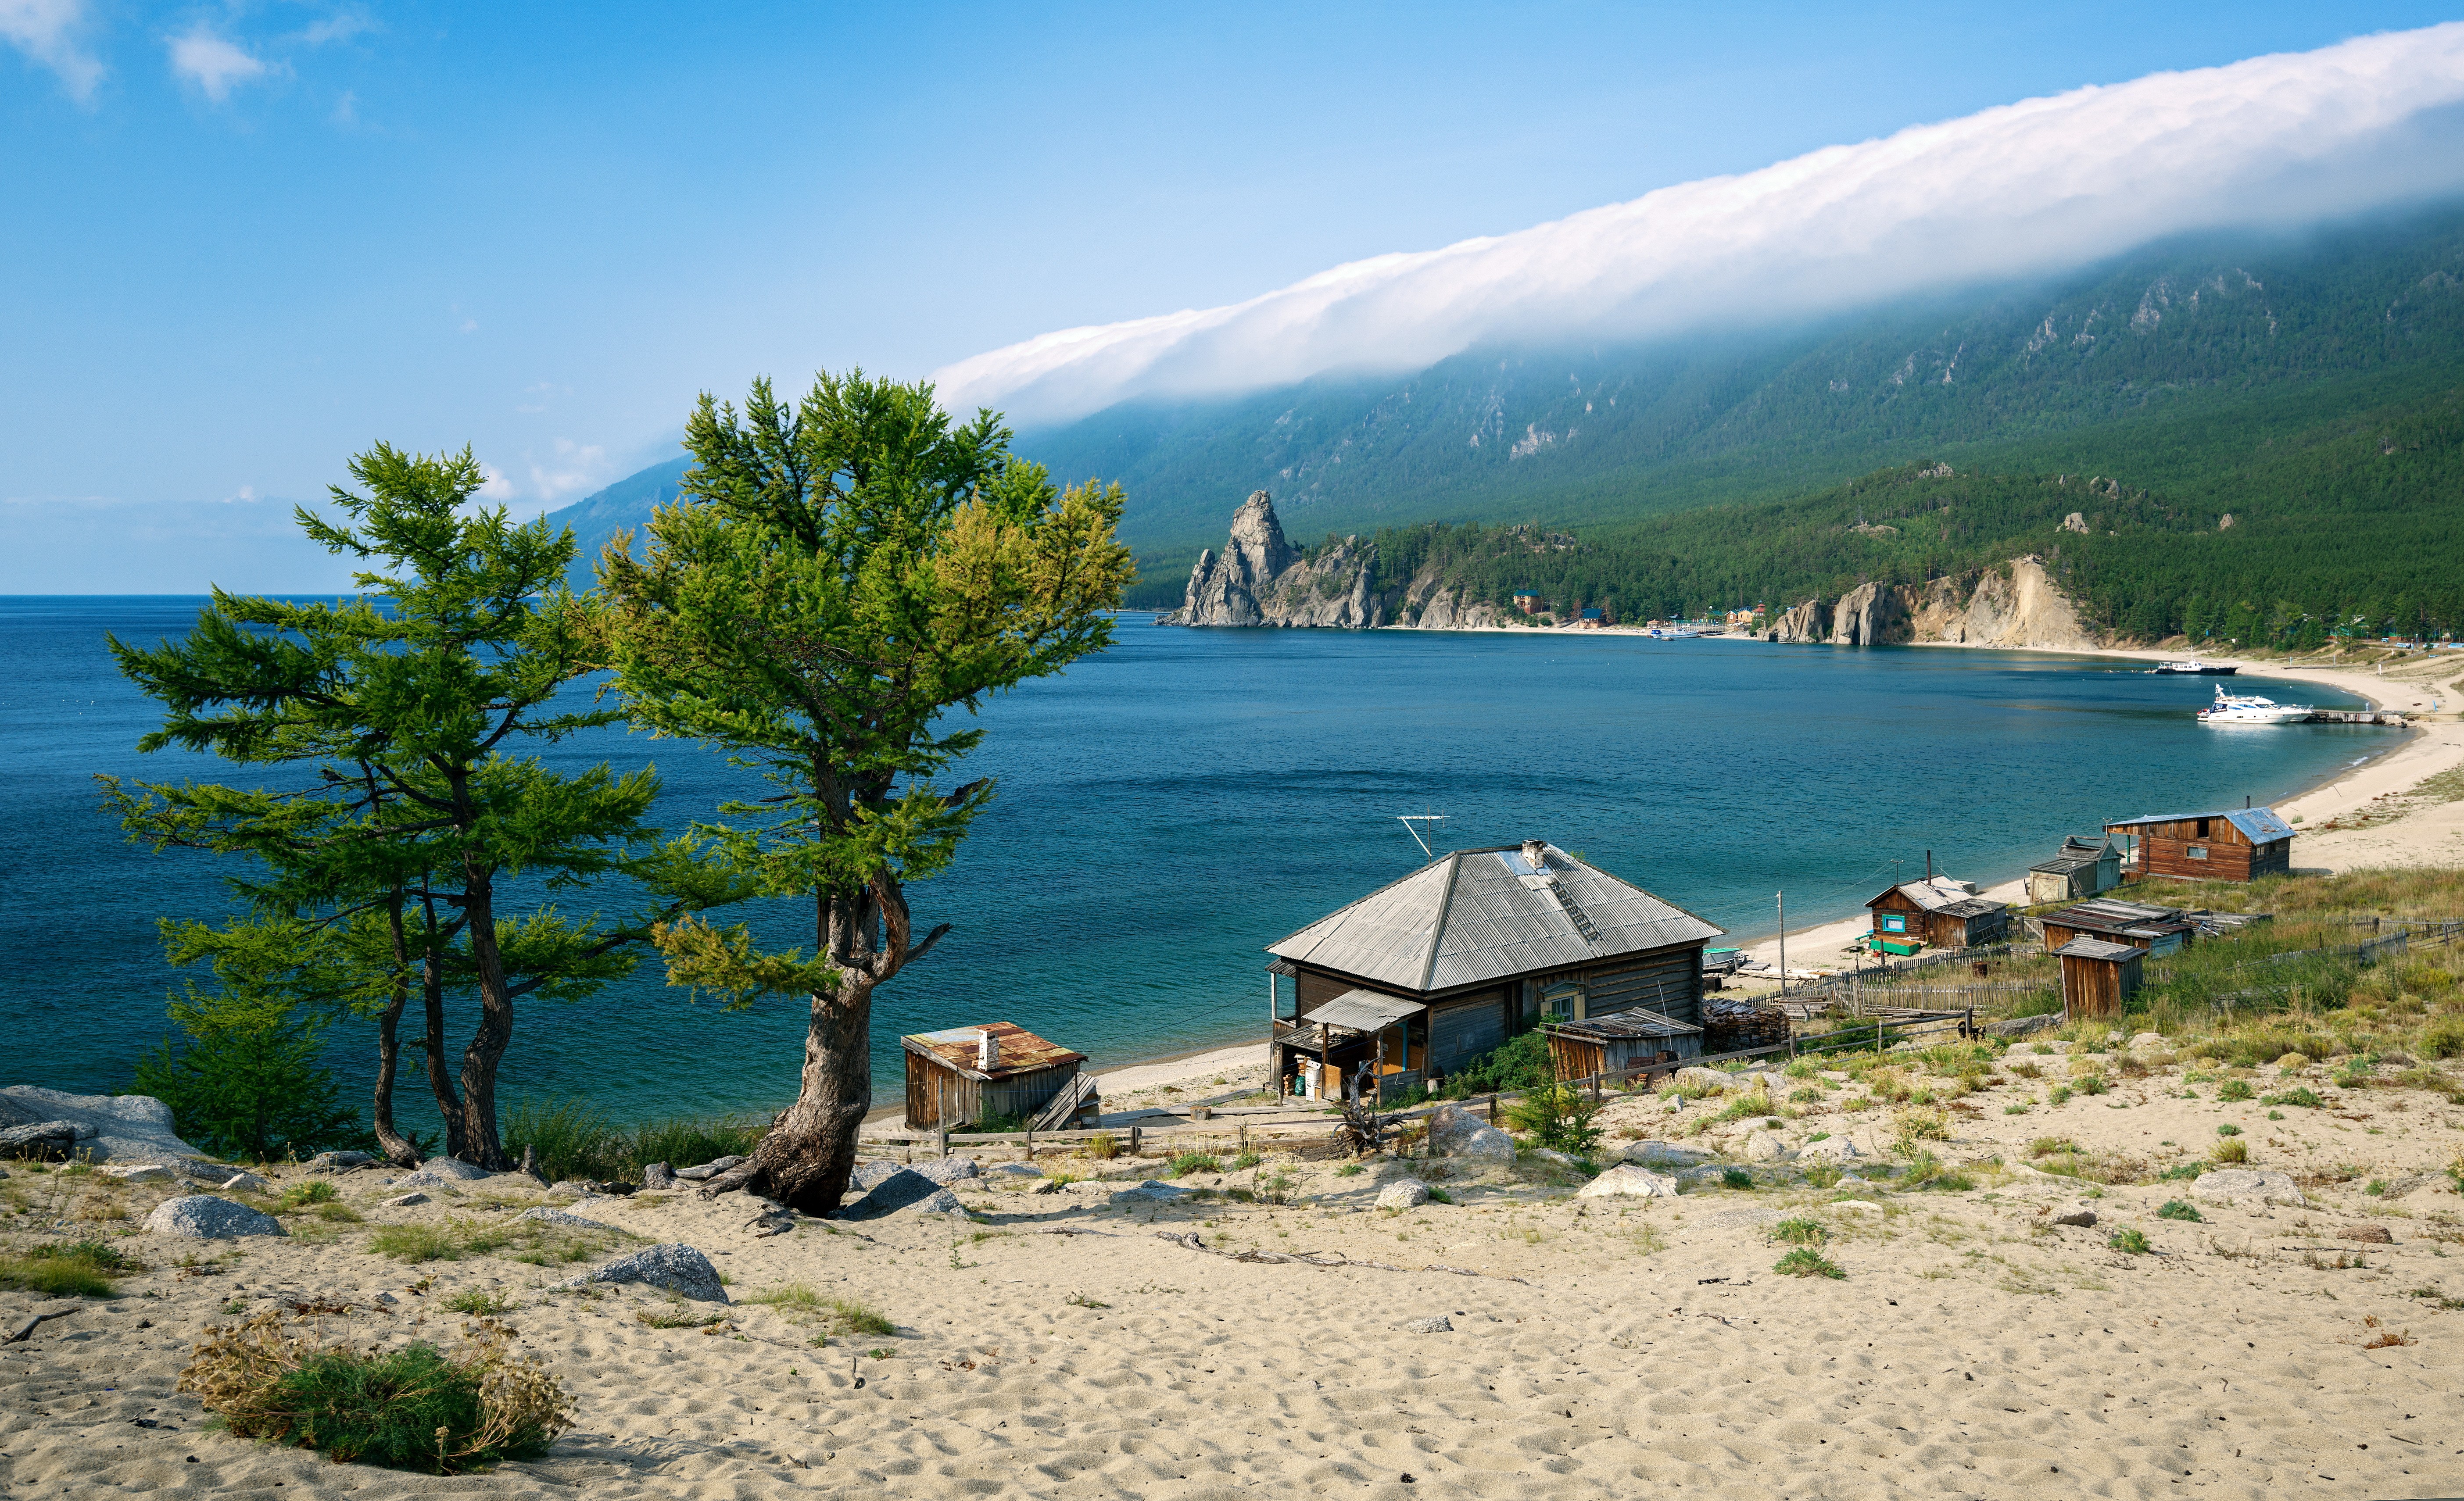 General 5616x3422 nature landscape water lake mountains trees clouds Lake Baikal Russia house boat sand beach forest mist